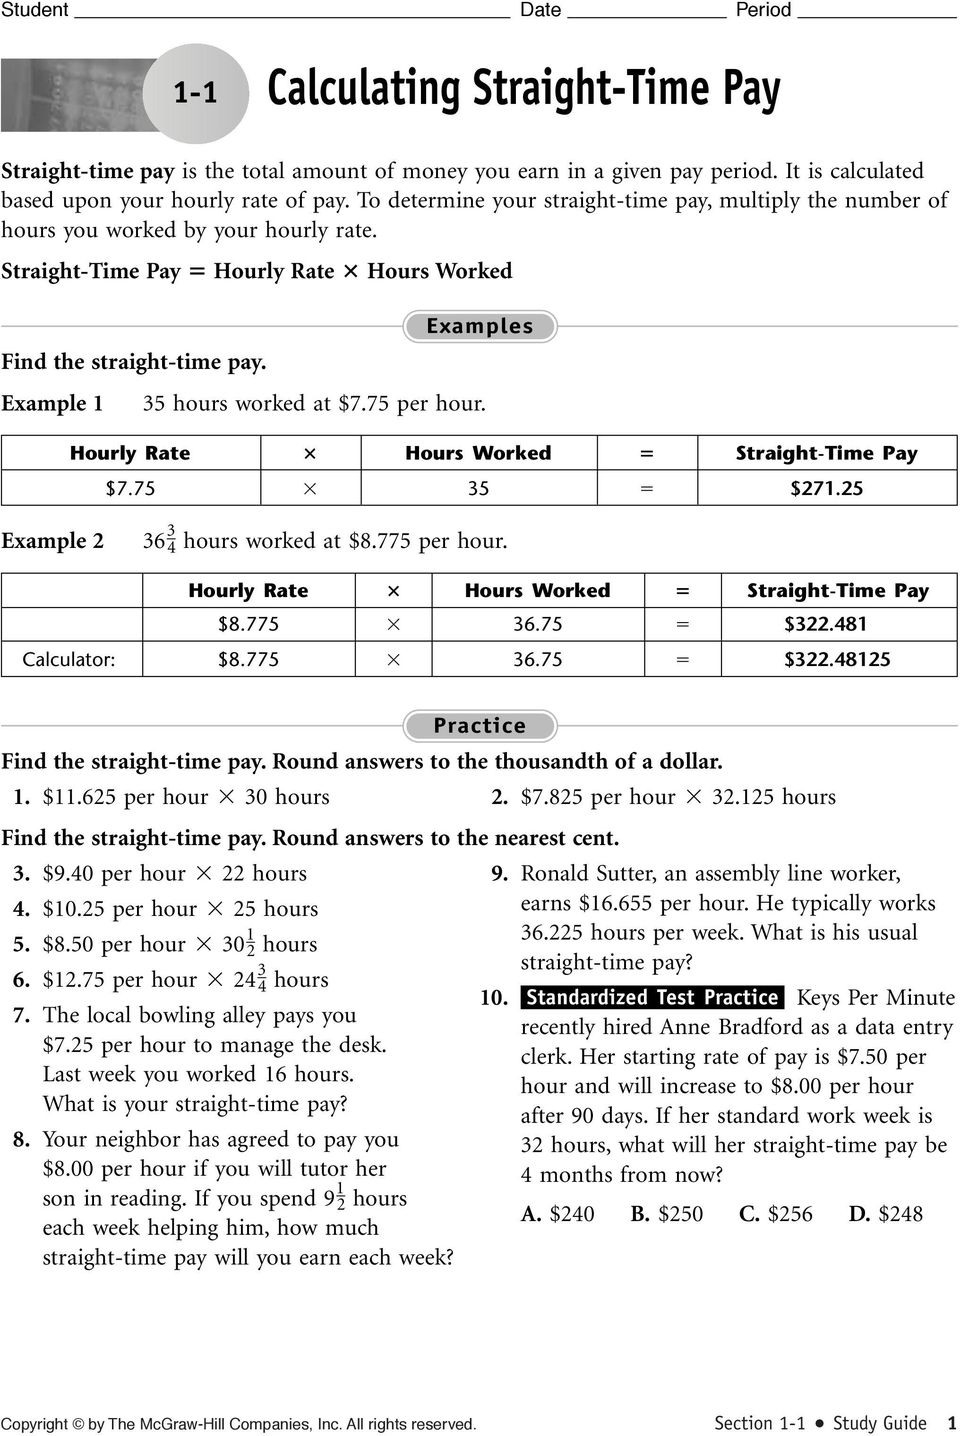 calculating-straighttime-pay-pdf-db-excel